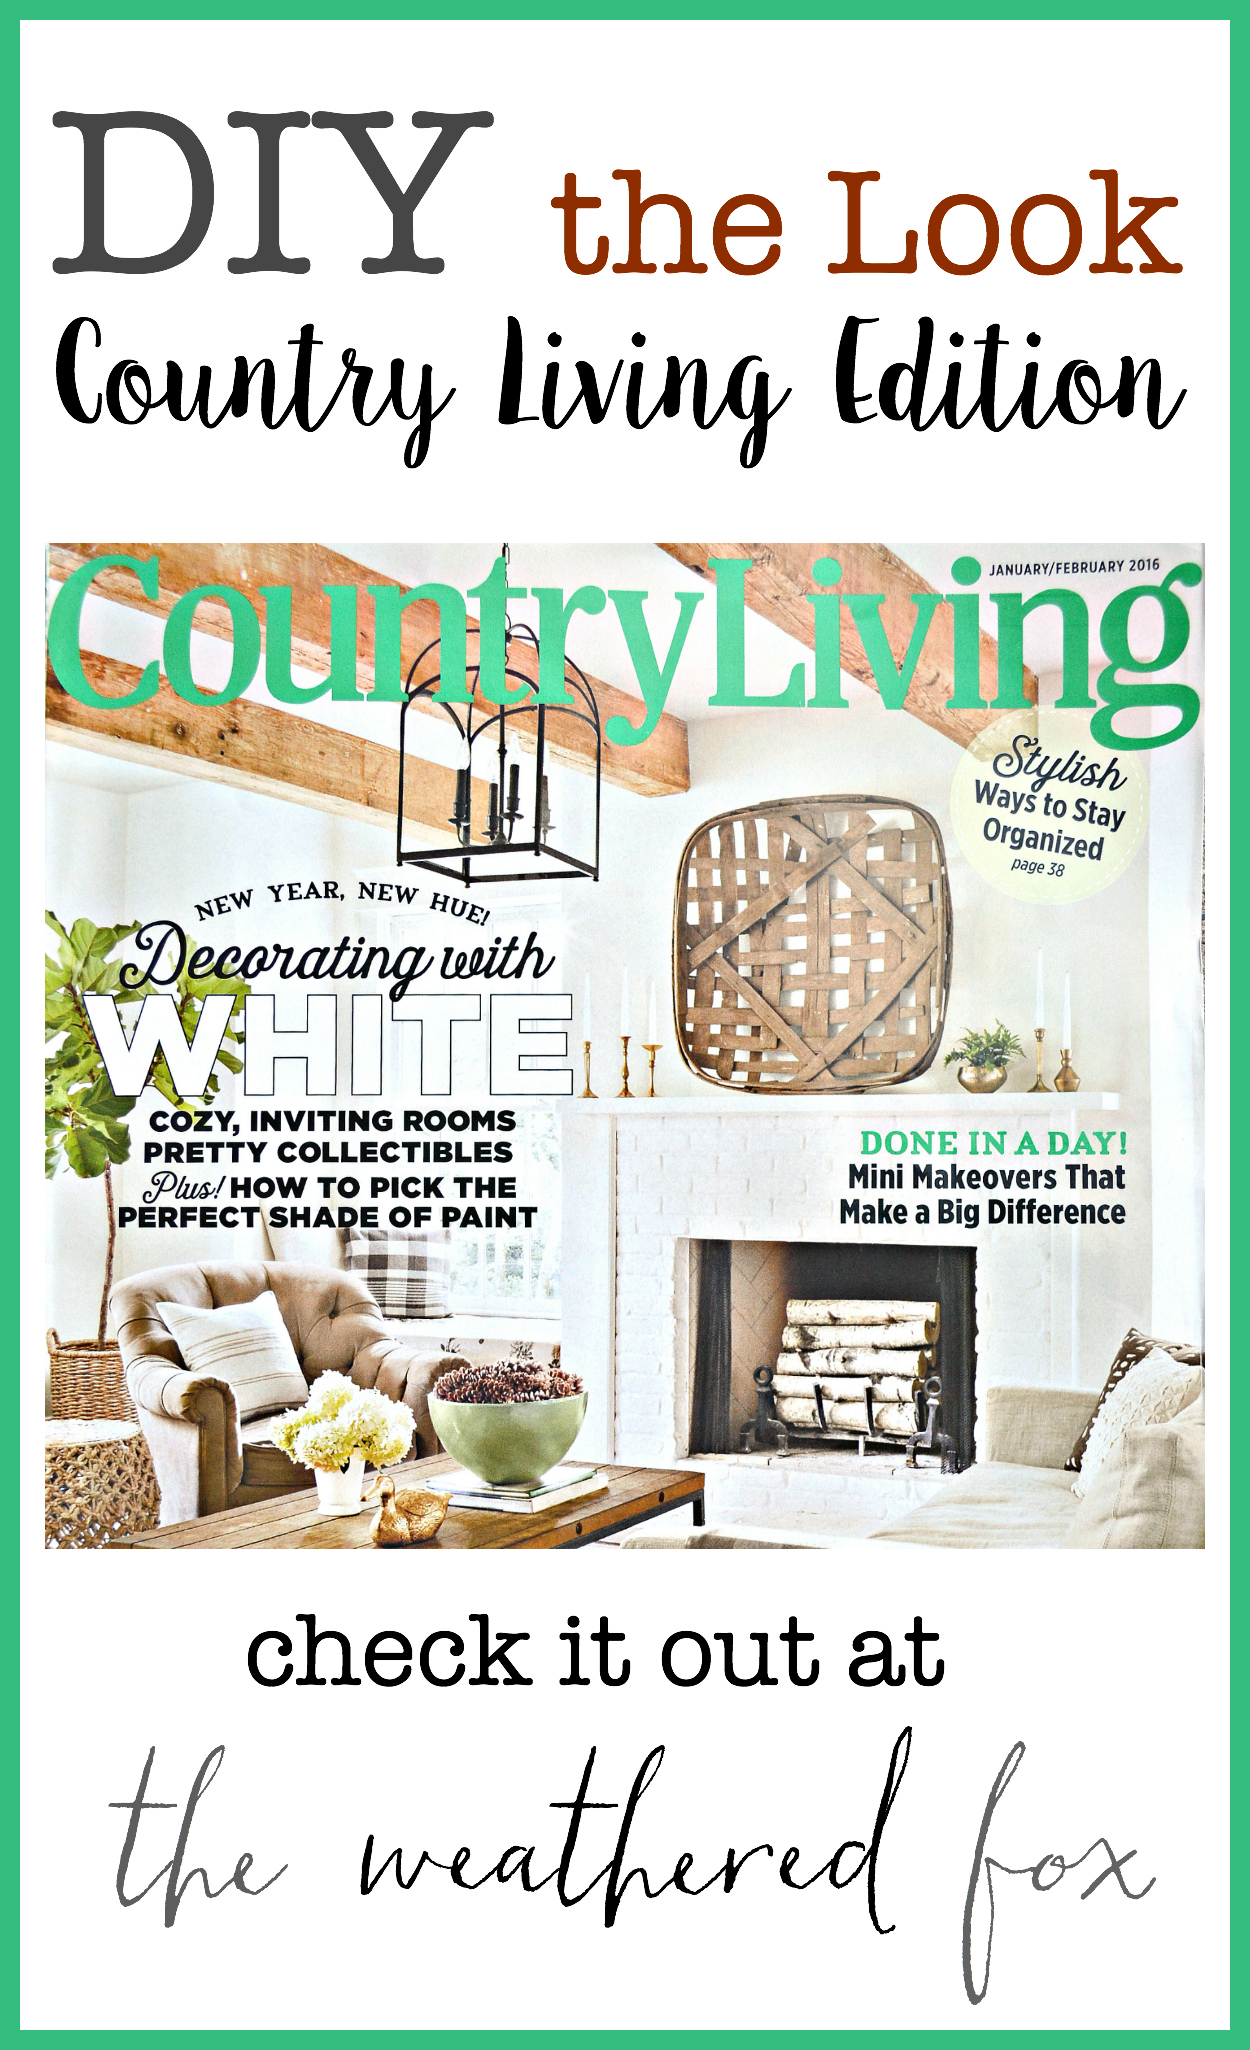 DIY the Look Country Living Edition